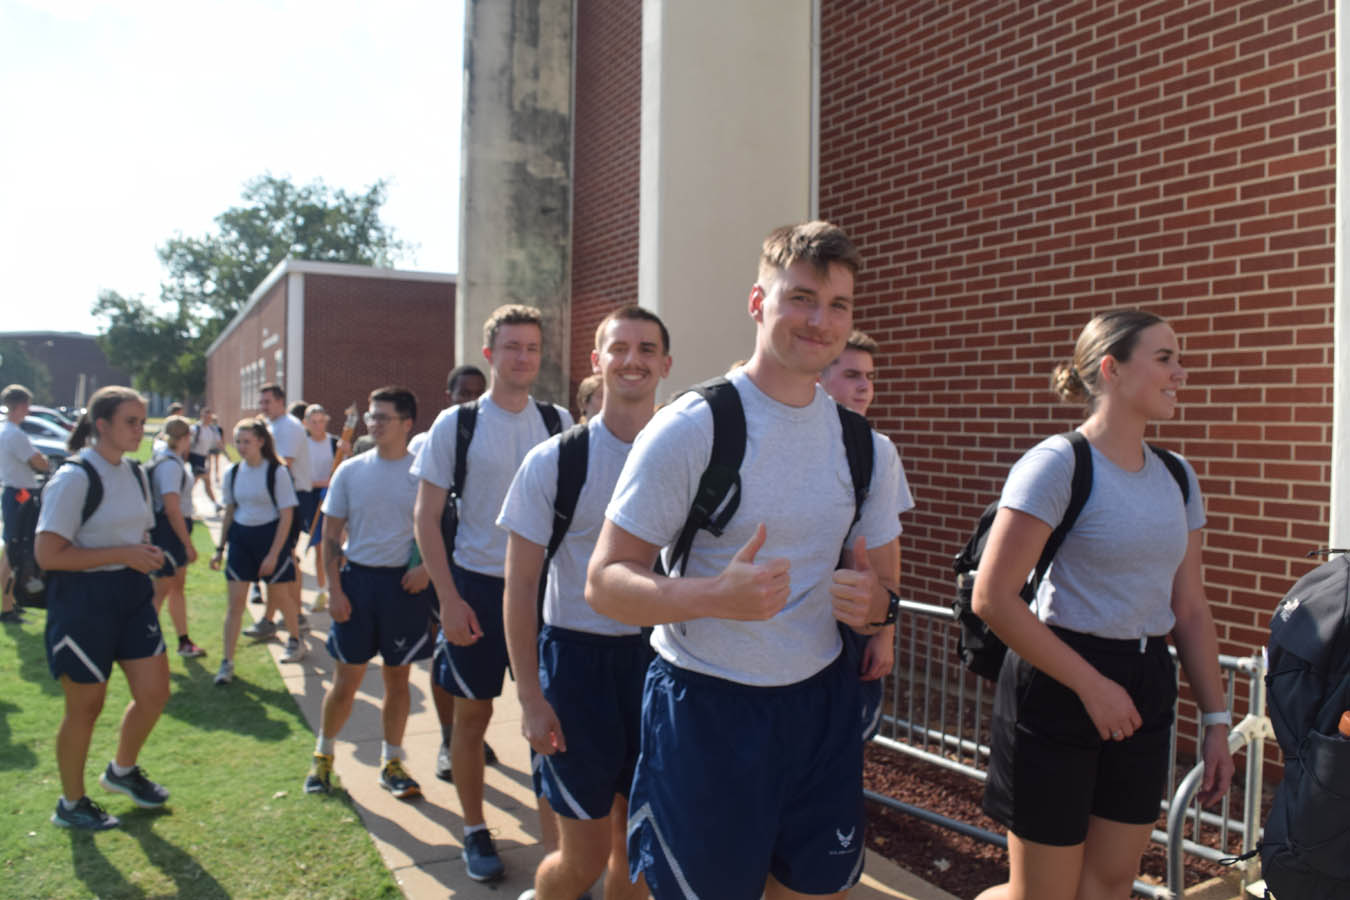 Cadets on their way to PT